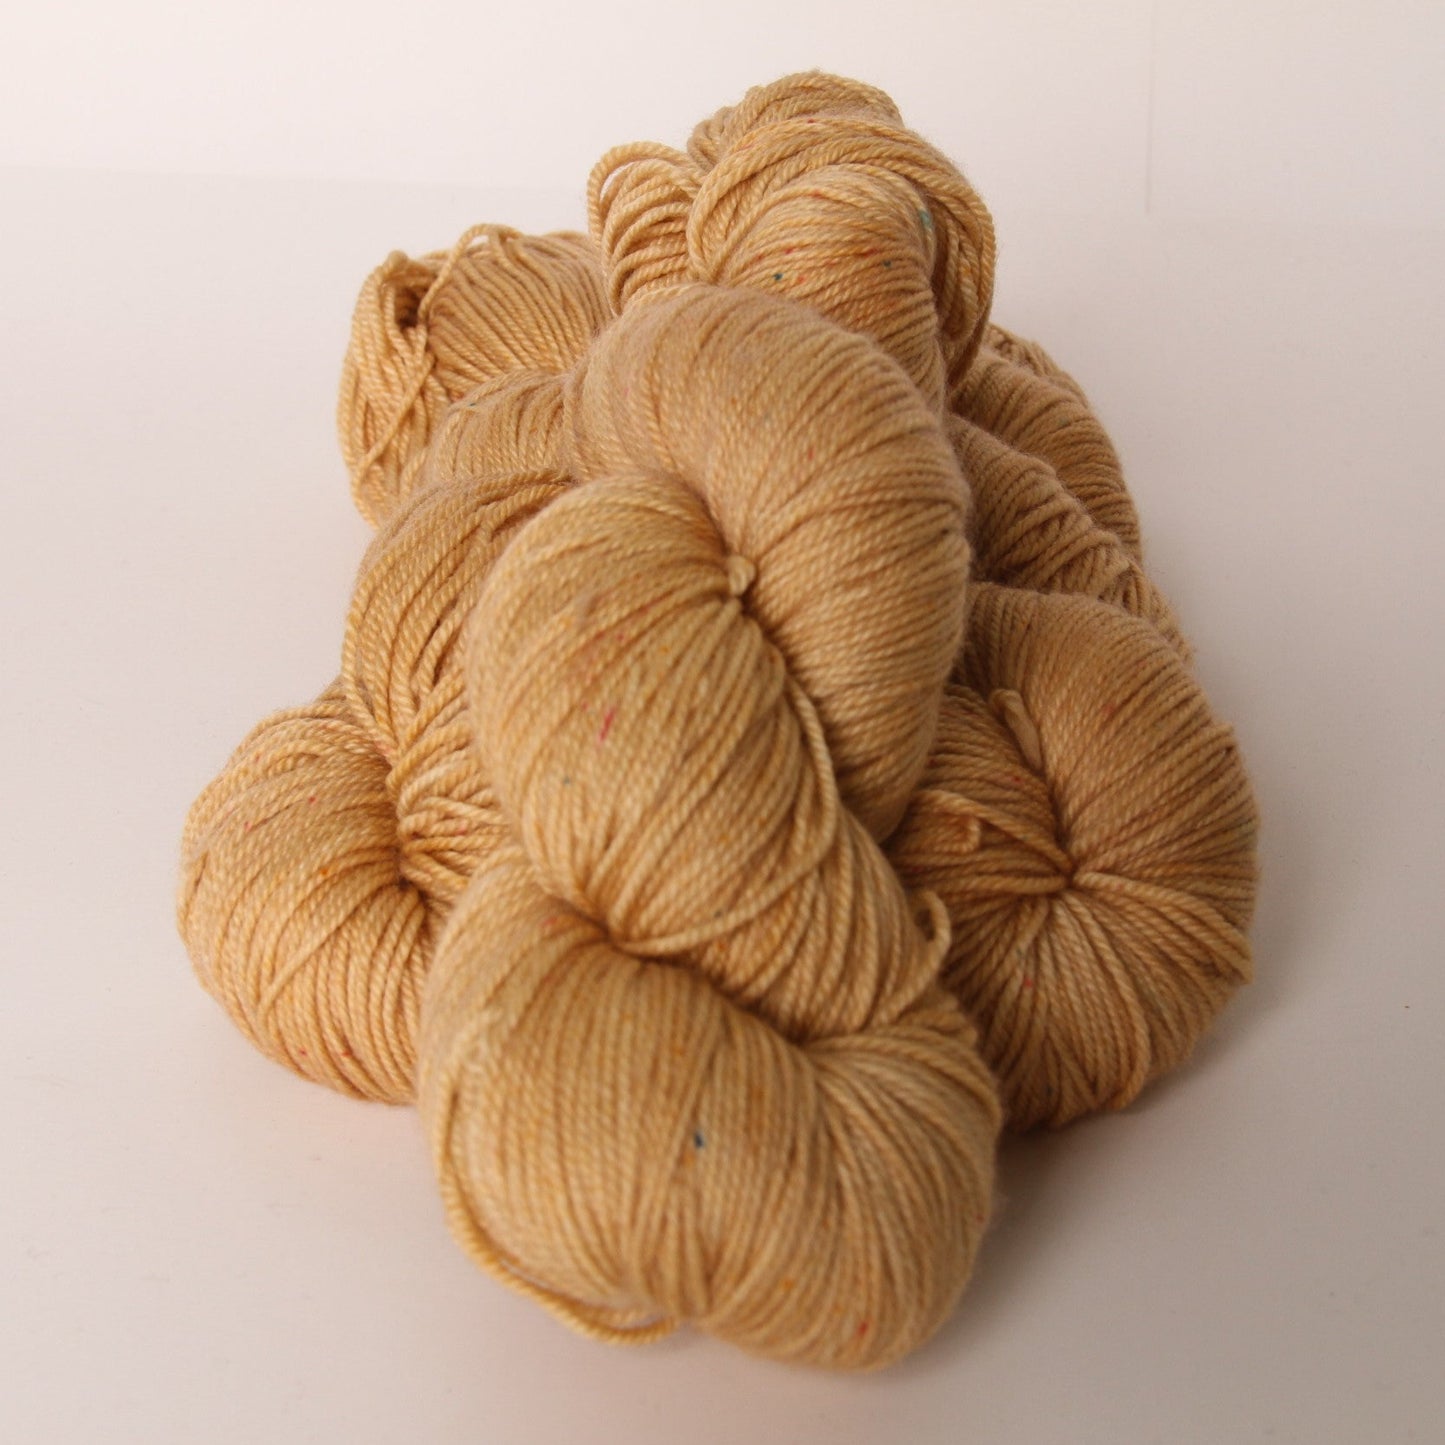 Firefly | Merino/Cashmere Blend | Semi Solid | Ready to ship